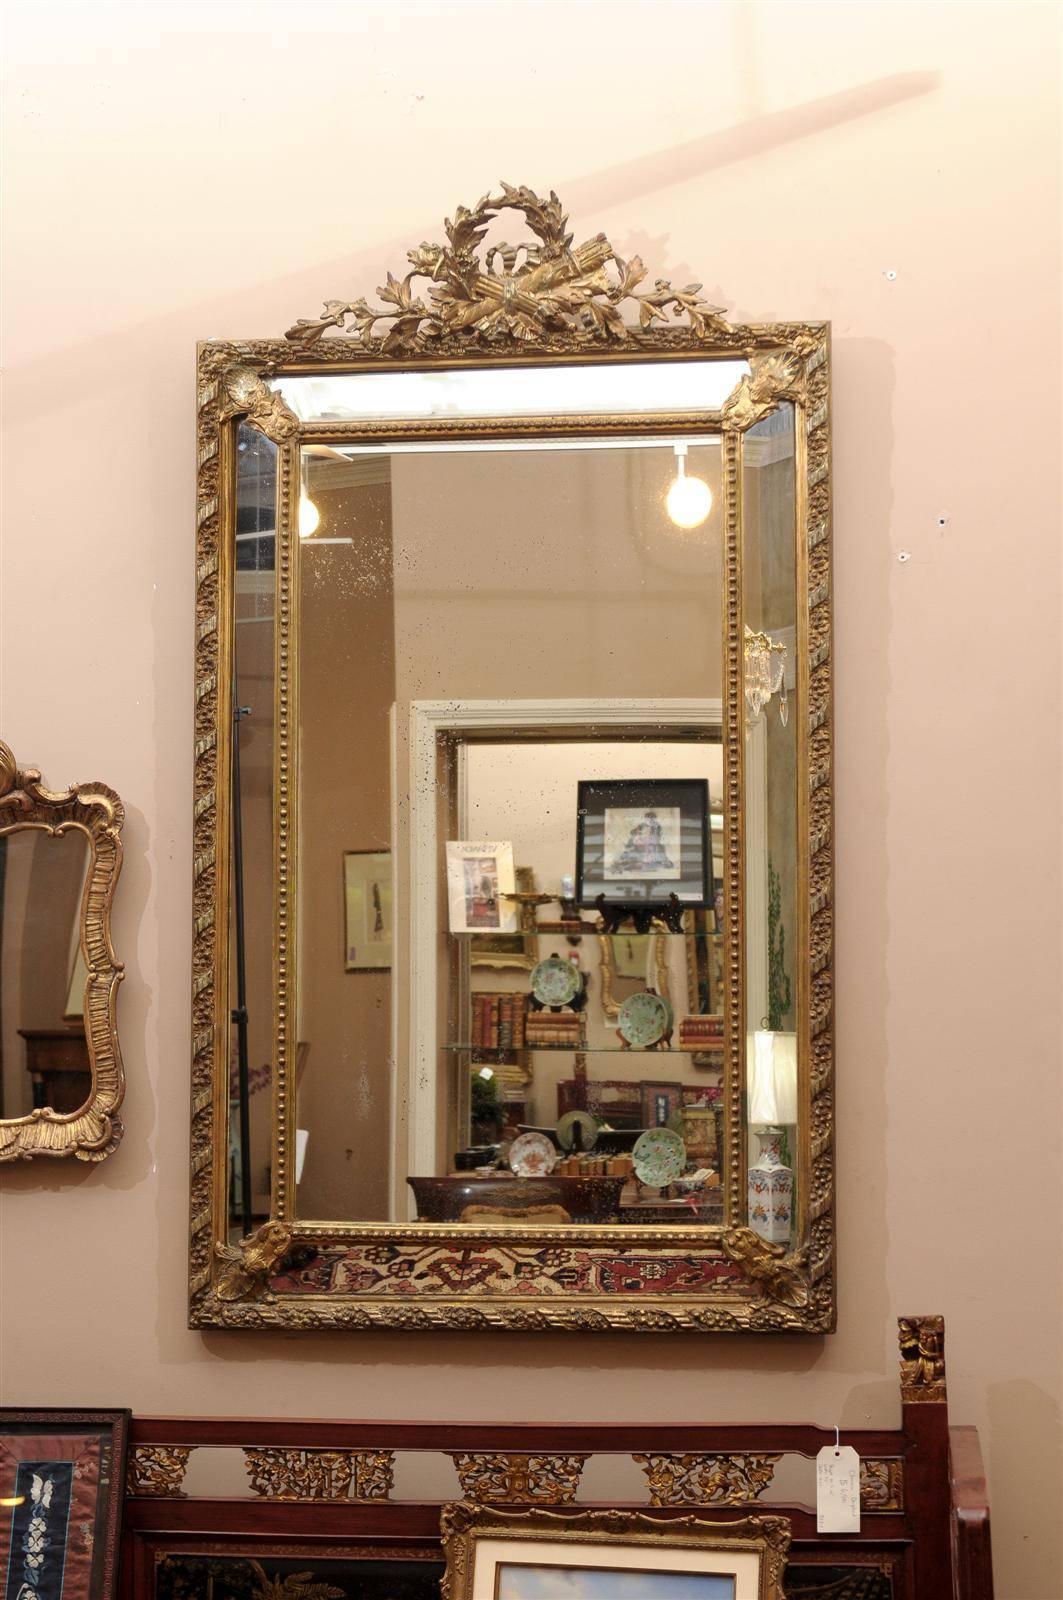 Mid-19th century hand-carved giltwood cushion mirror. Torch, quill and wreath pediment above the molded rectangular frame. The original glass has aged beautifully.